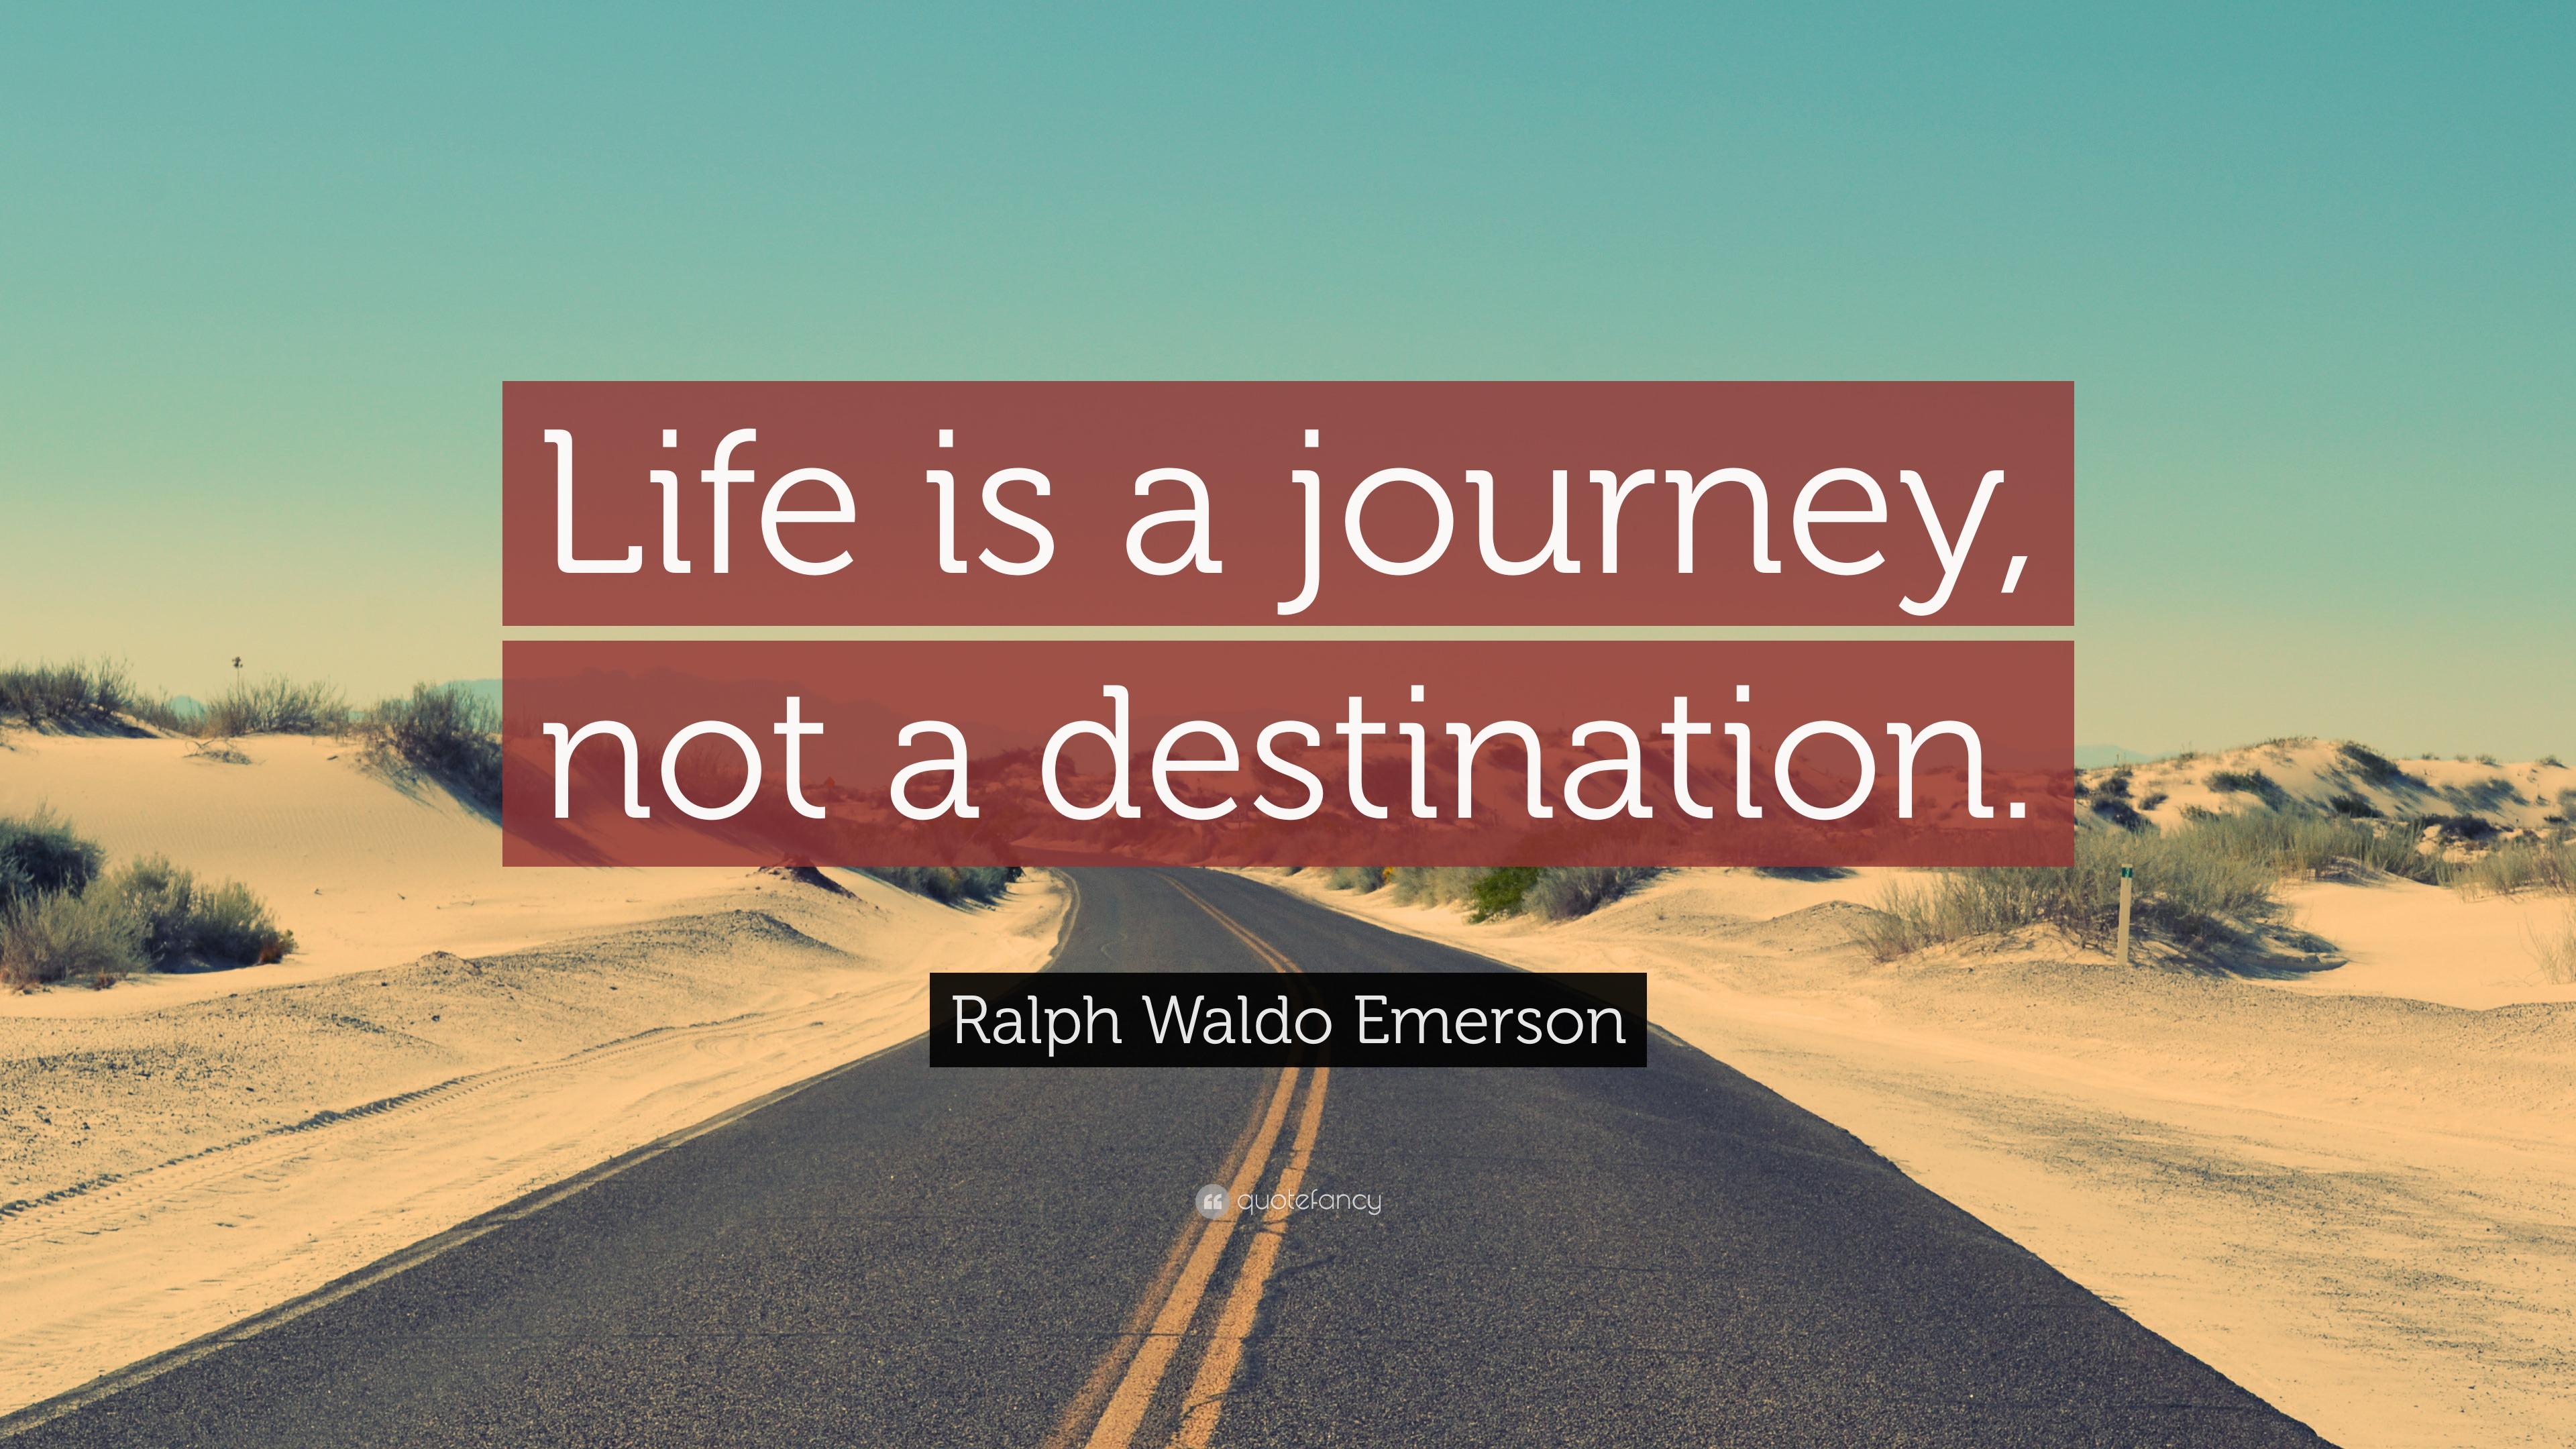 Ralph Waldo Emerson Quote “life Is A Journey Not A Destination”